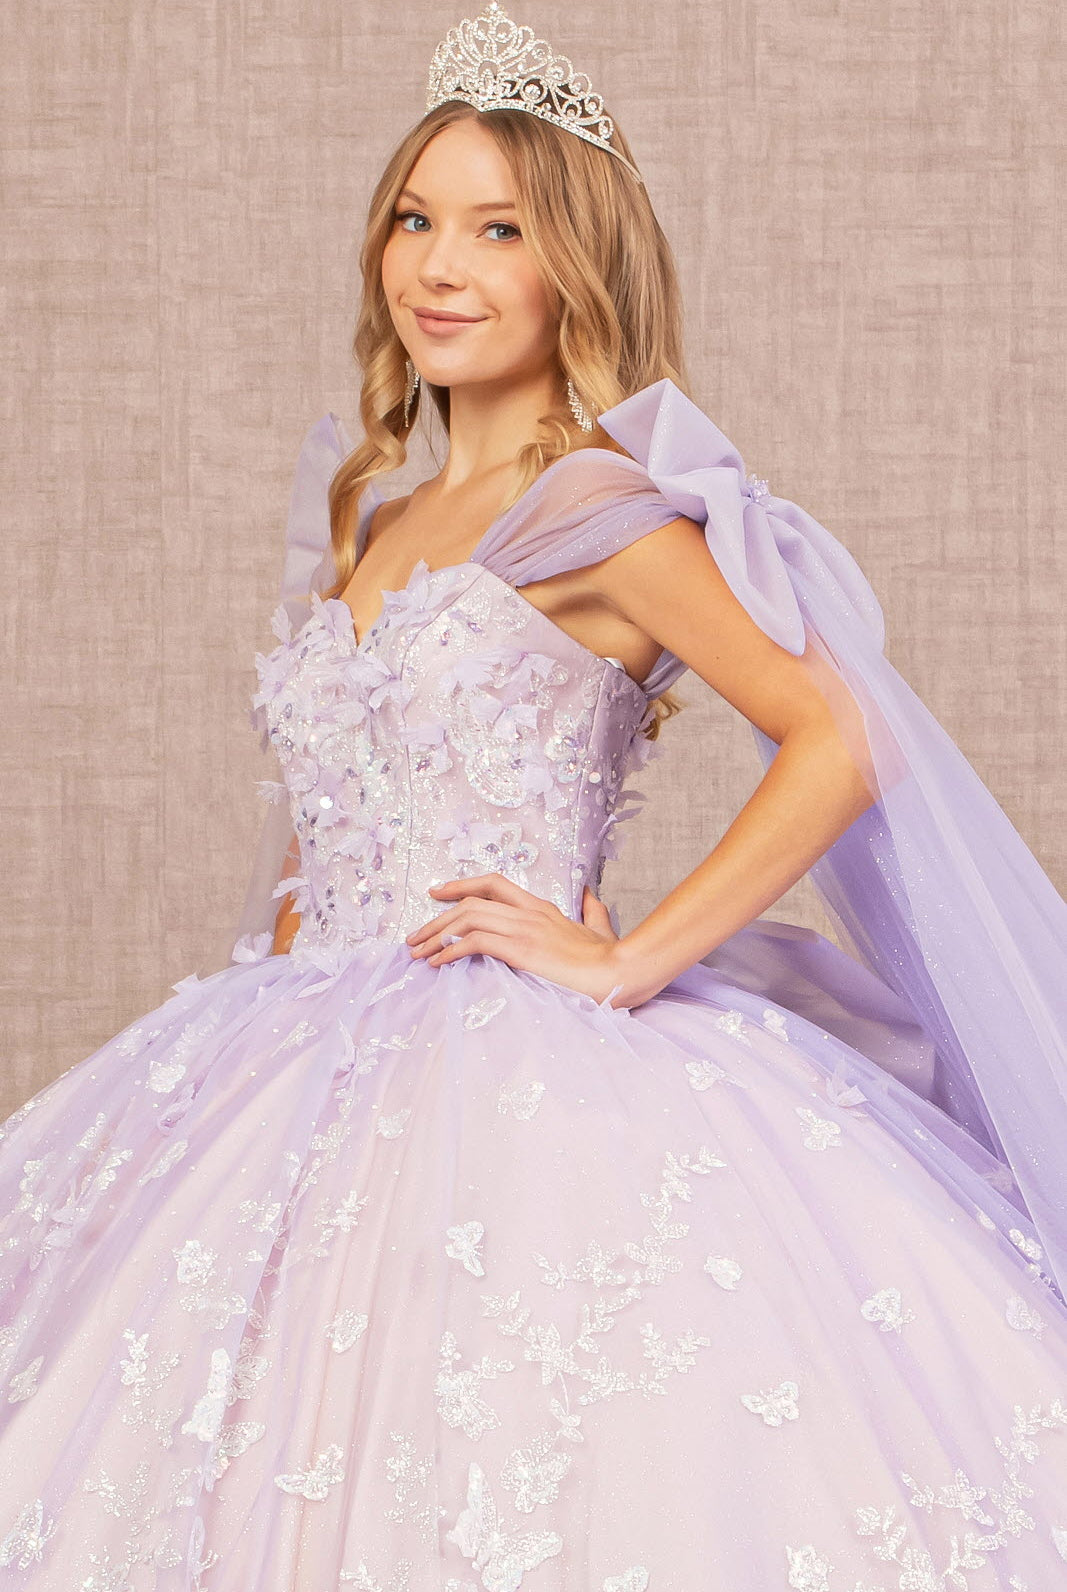 Jewel Glitter Quinceanera Gown Long Mesh Layer and Ribbons GLGL3175-QUINCEANERA-smcfashion.com